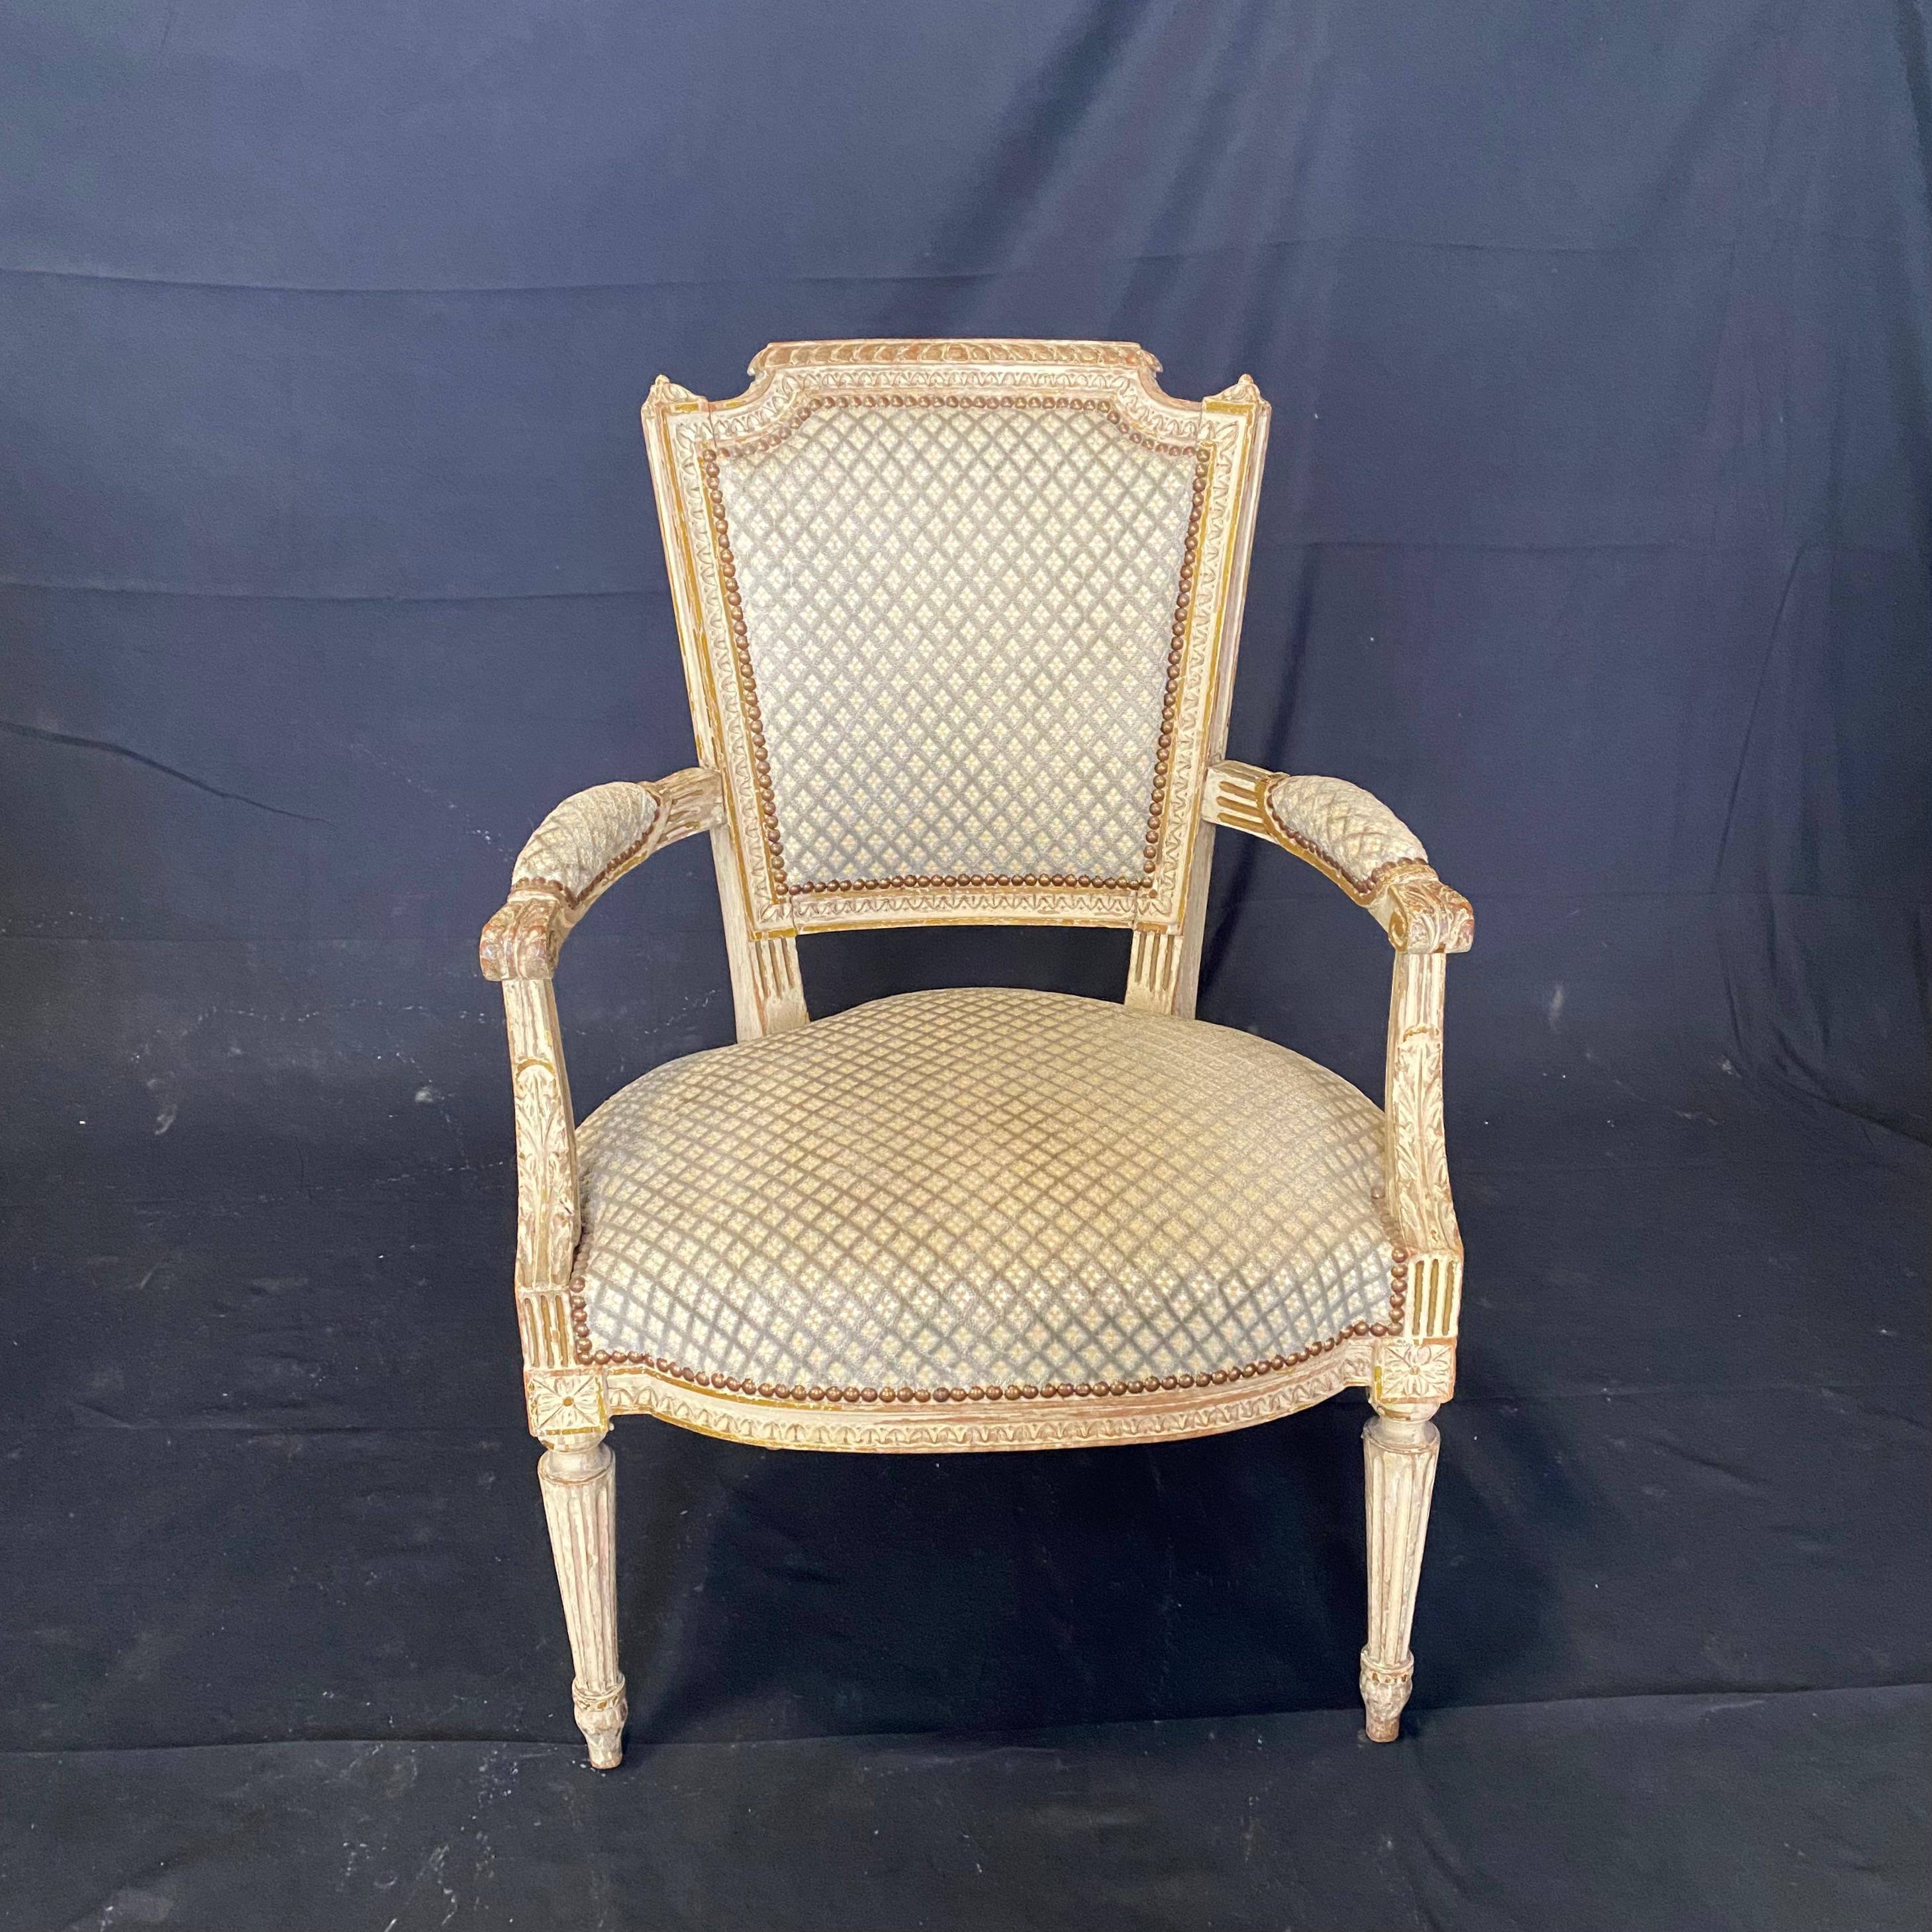 Elegant French Louis XVI period chairs with original white and gold paint. Classic diamond pattern fabric accented on all sides with nailhead trim. 
Measure: Arm height 24.5
Seat height 17.5.

 